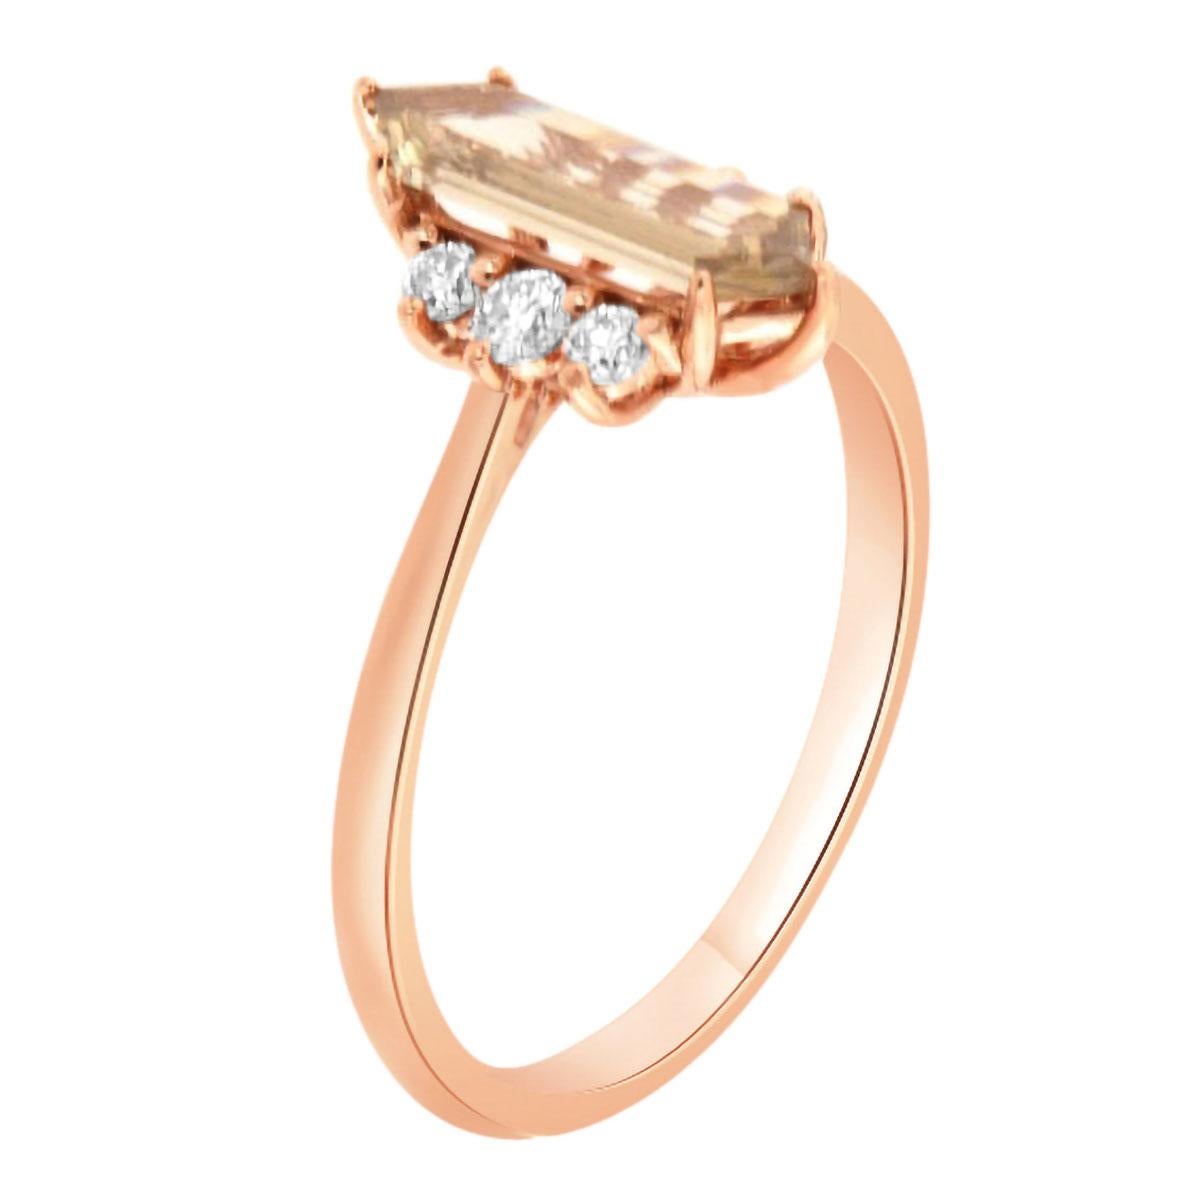 This 14k Rose gold rustic ring features a 0.73 Carat Hexagonal faceted brilliant light champagne color Natural Diamond flanked by six (6) brilliant round diamonds on top of a 1.6 MM wide band. 
The total diamond weight on the ring is 0.17-Carat.